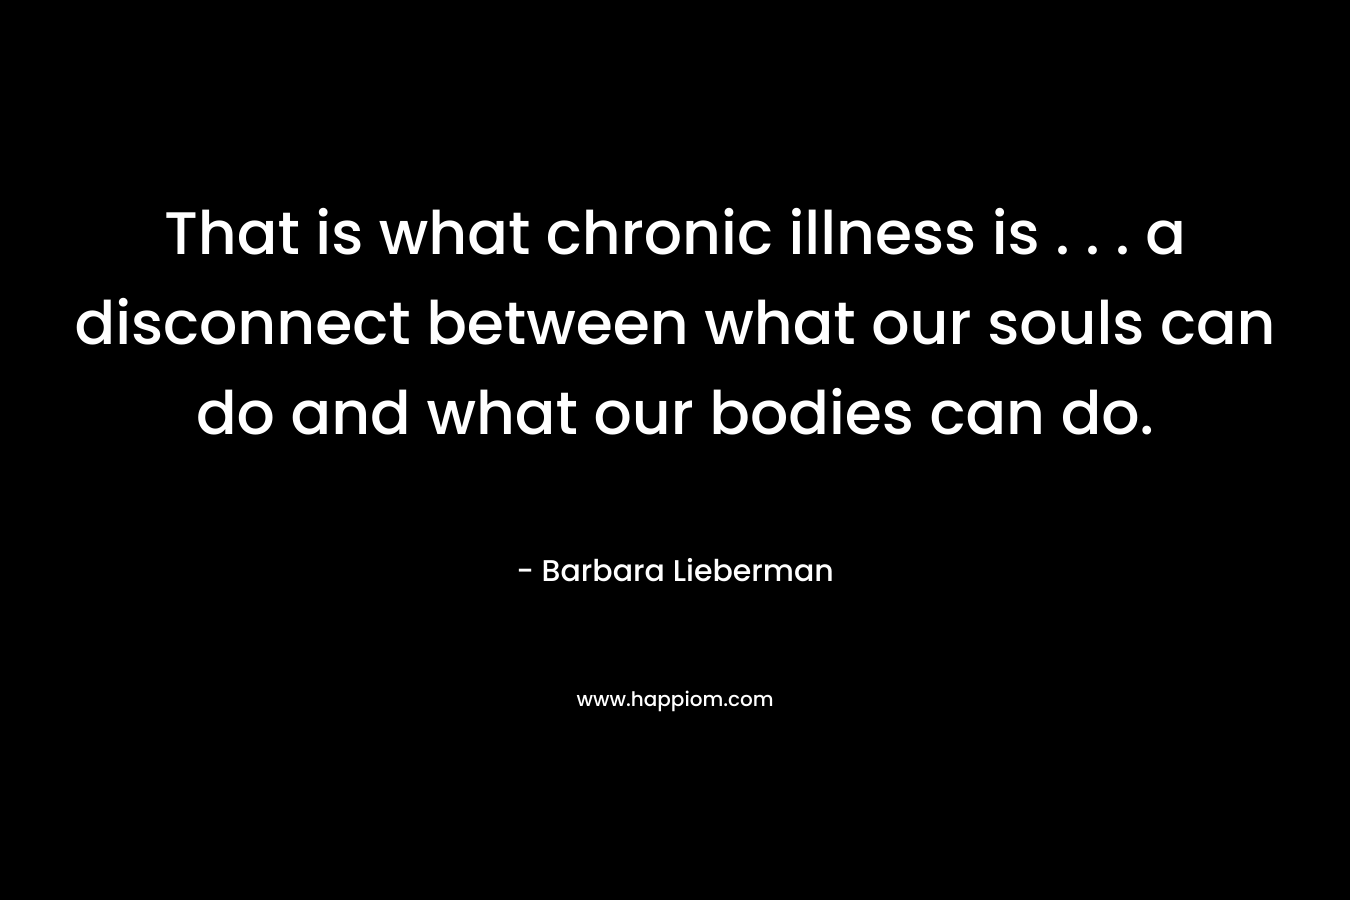 That is what chronic illness is . . . a disconnect between what our souls can do and what our bodies can do.